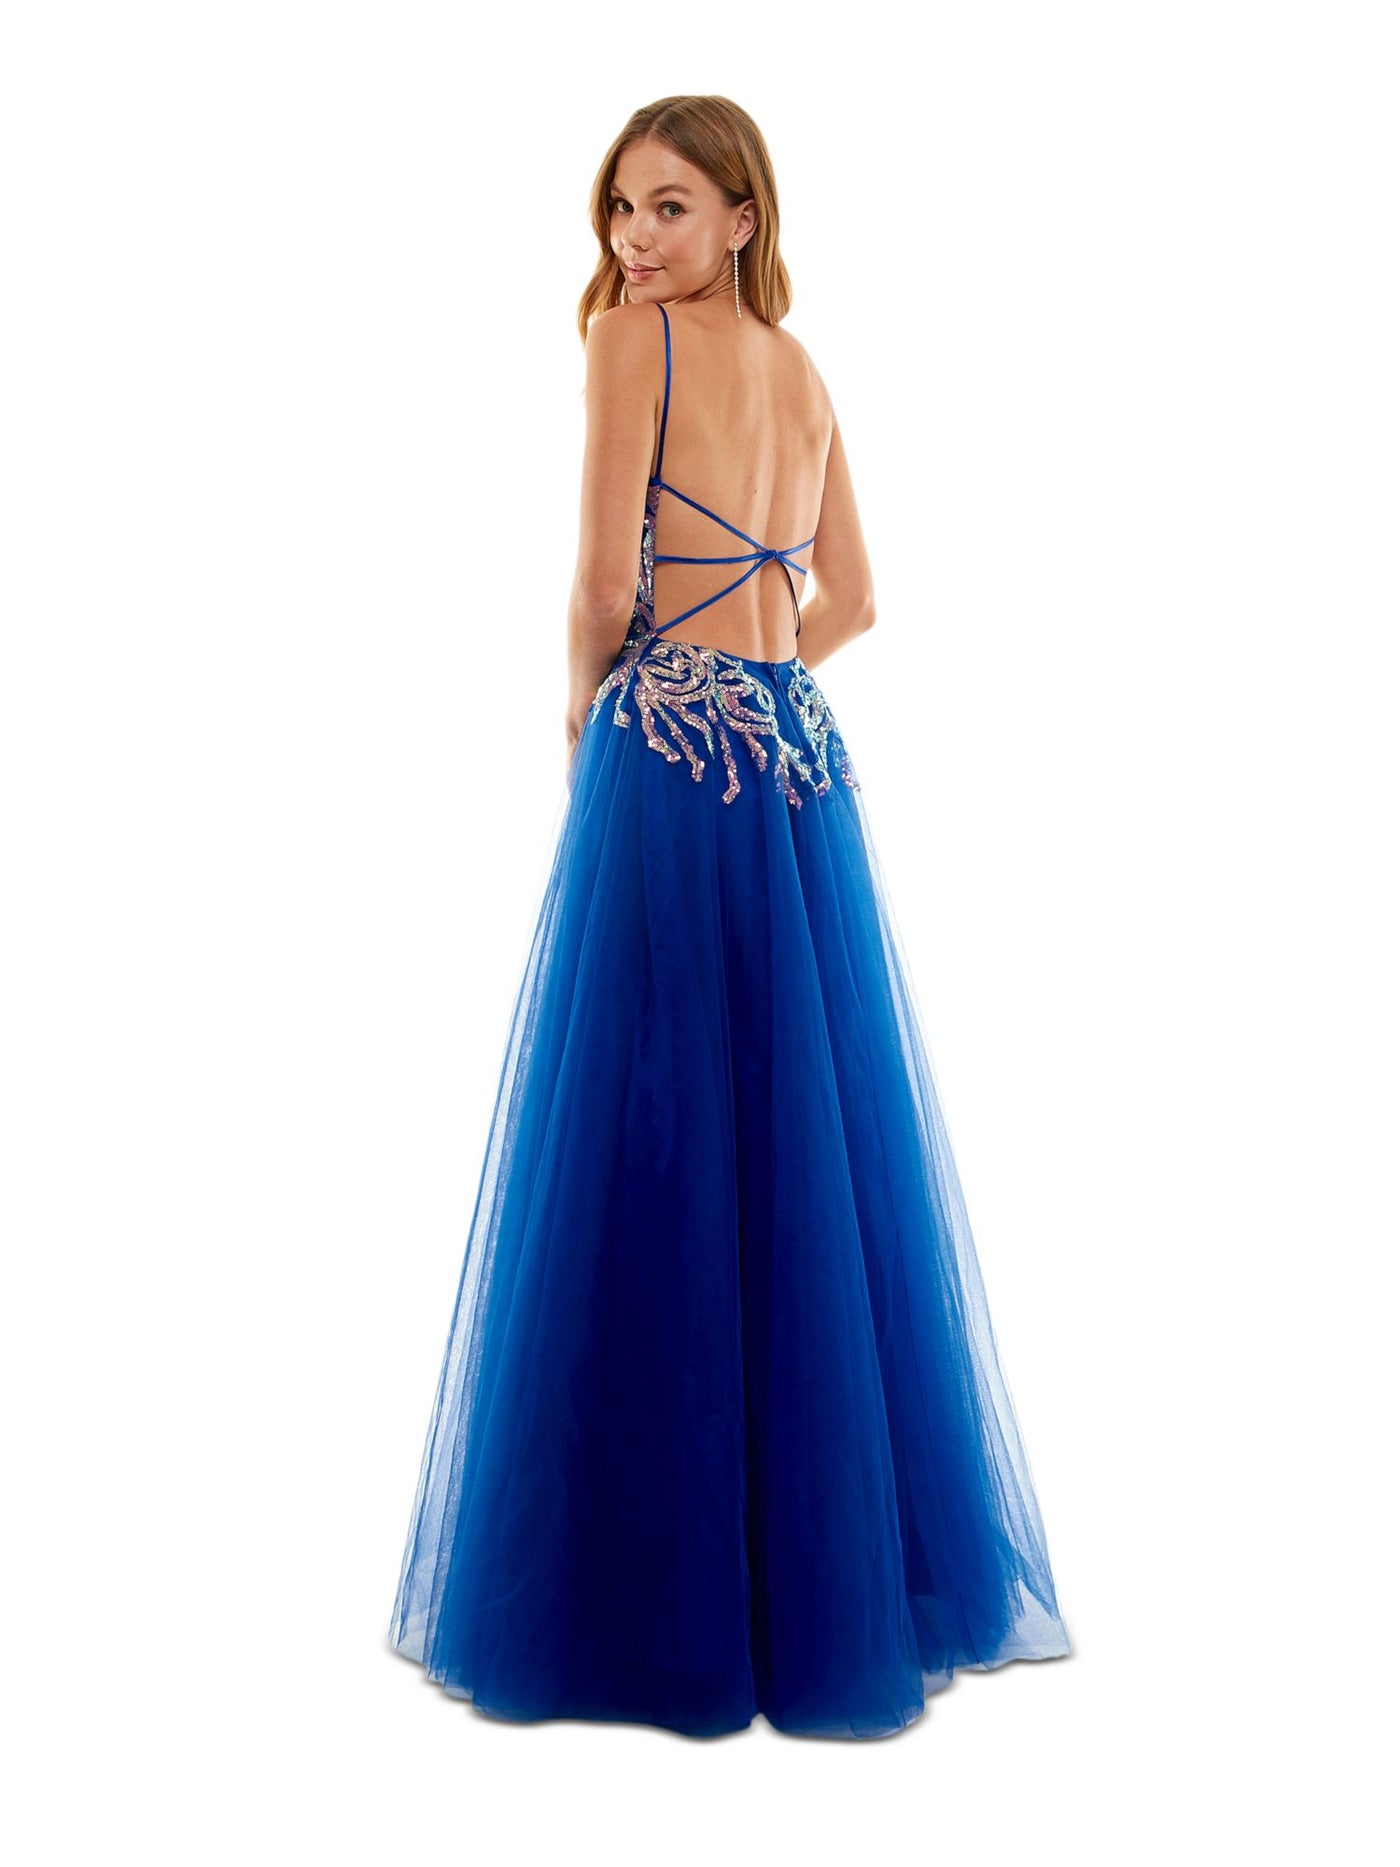 SAY YES TO THE PROM Womens Blue Zippered Lined Mesh Tulle Sheer Lace Up Back Spaghetti Strap V Neck Full-Length Party Gown Dress Juniors 7